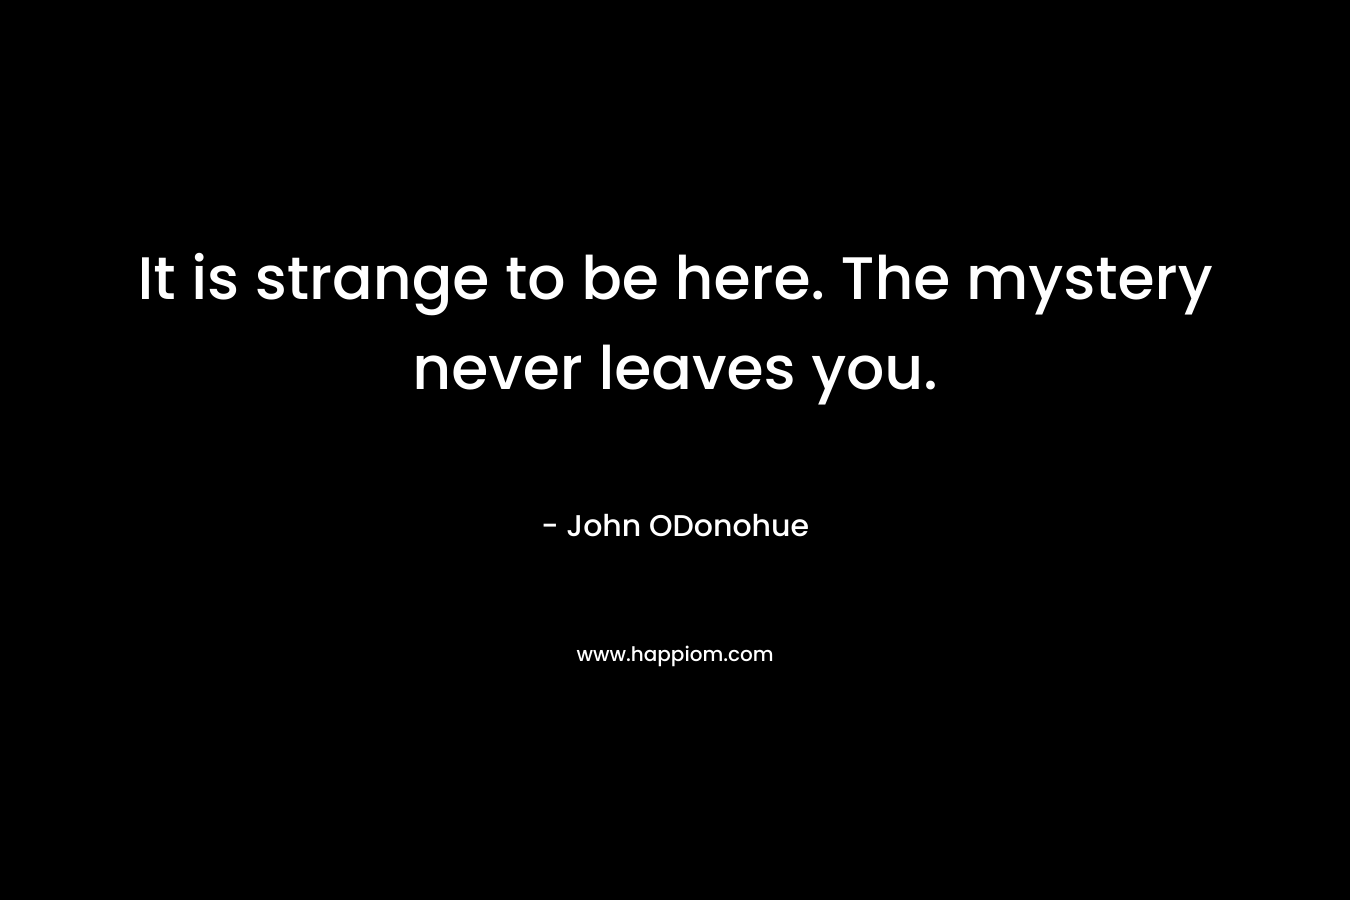 It is strange to be here. The mystery never leaves you.